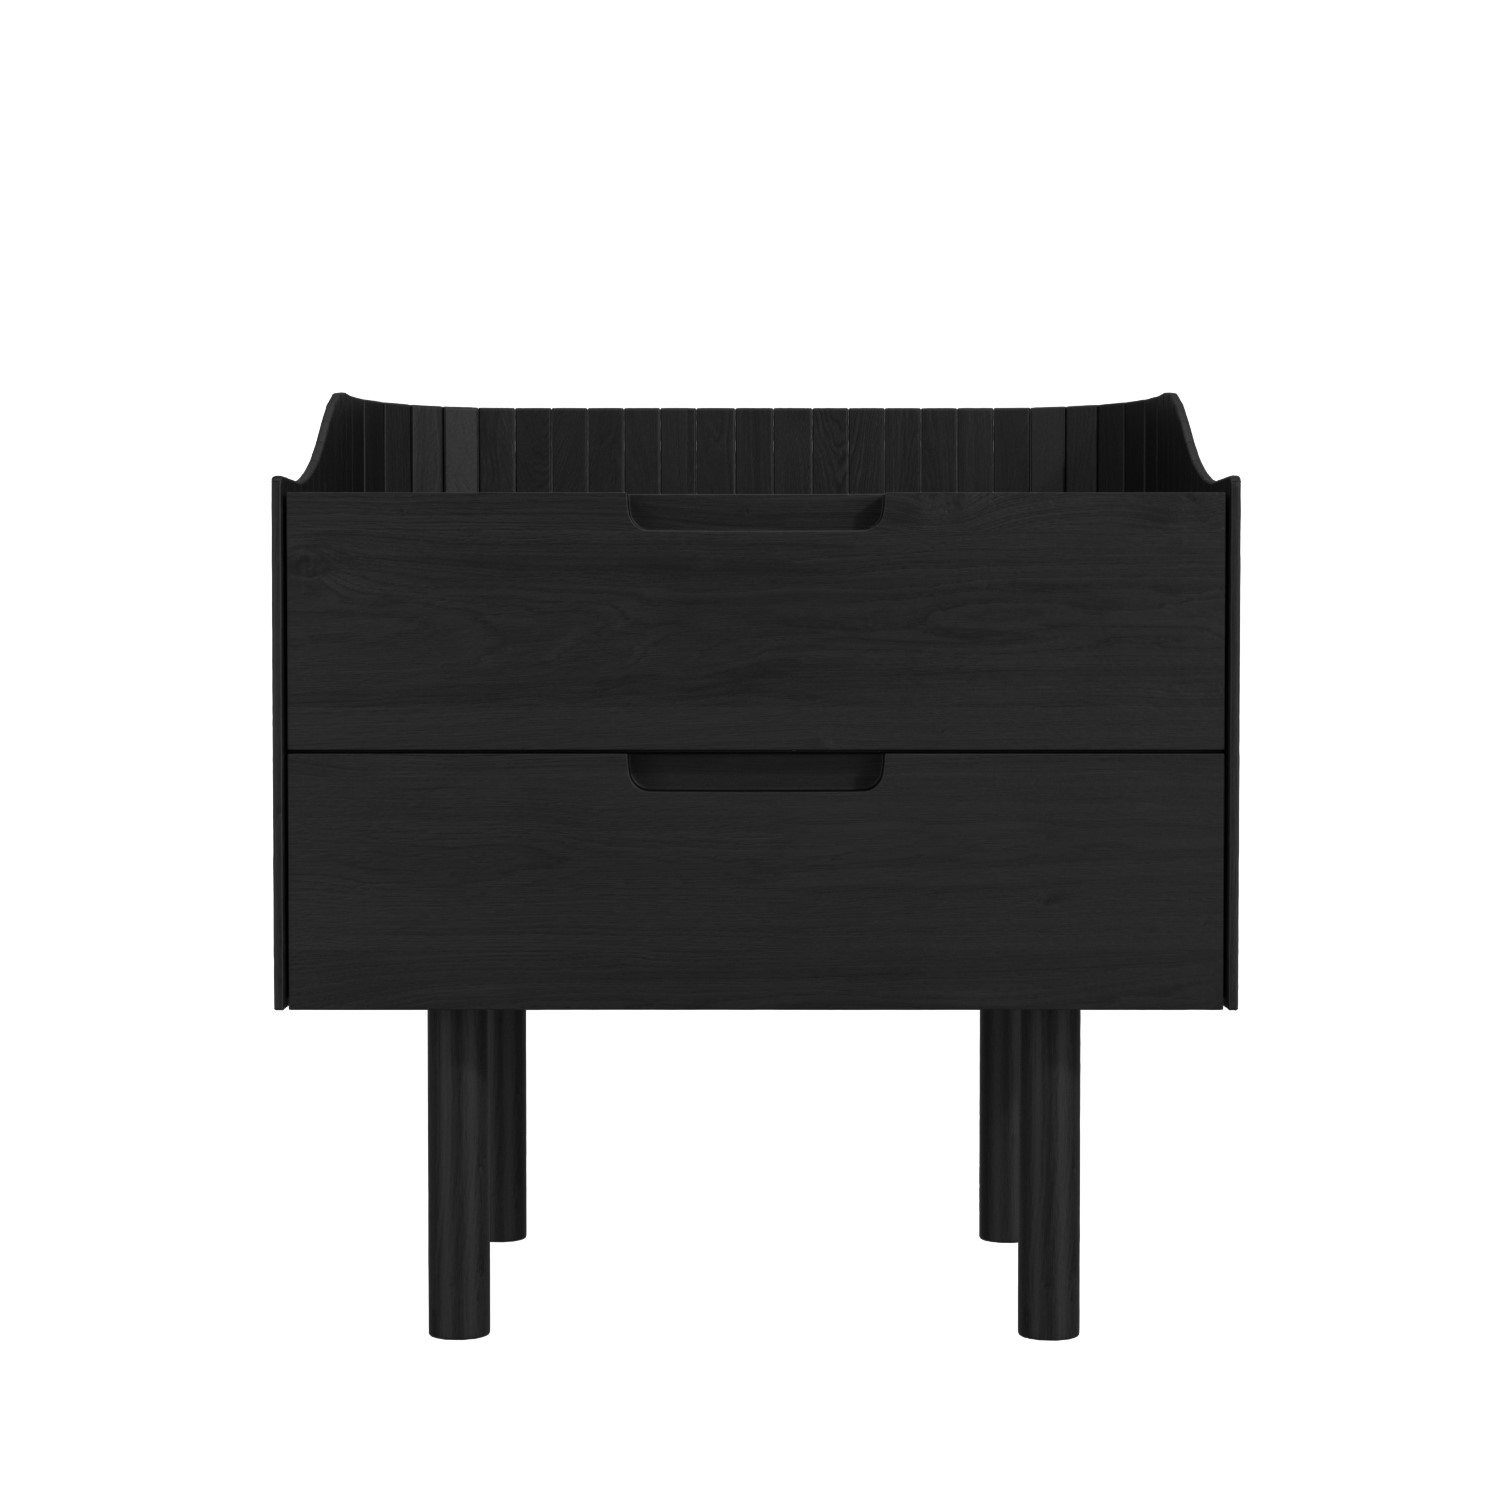 Read more about Black mid-century modern 2 drawer bedside table saskia